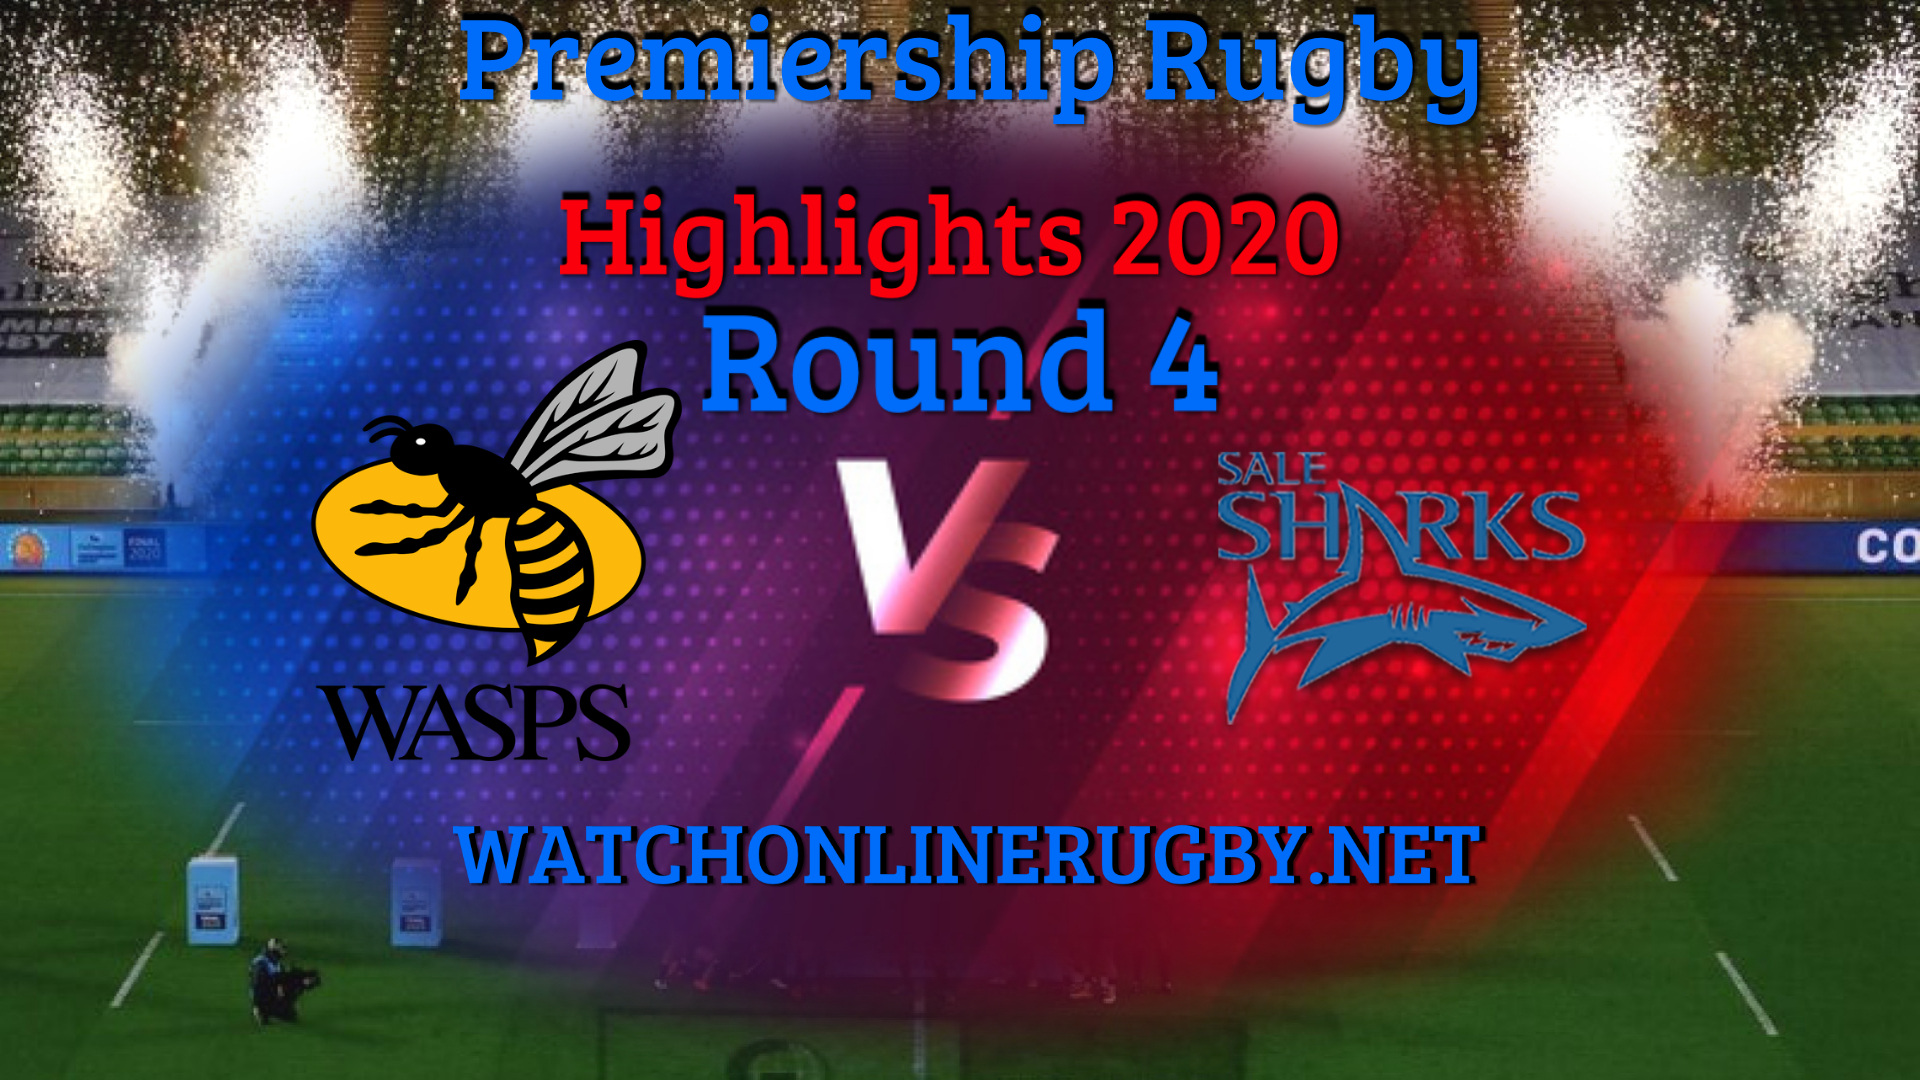 Sale Sharks VS Wasps Premiership Rugby 2020 RD 4